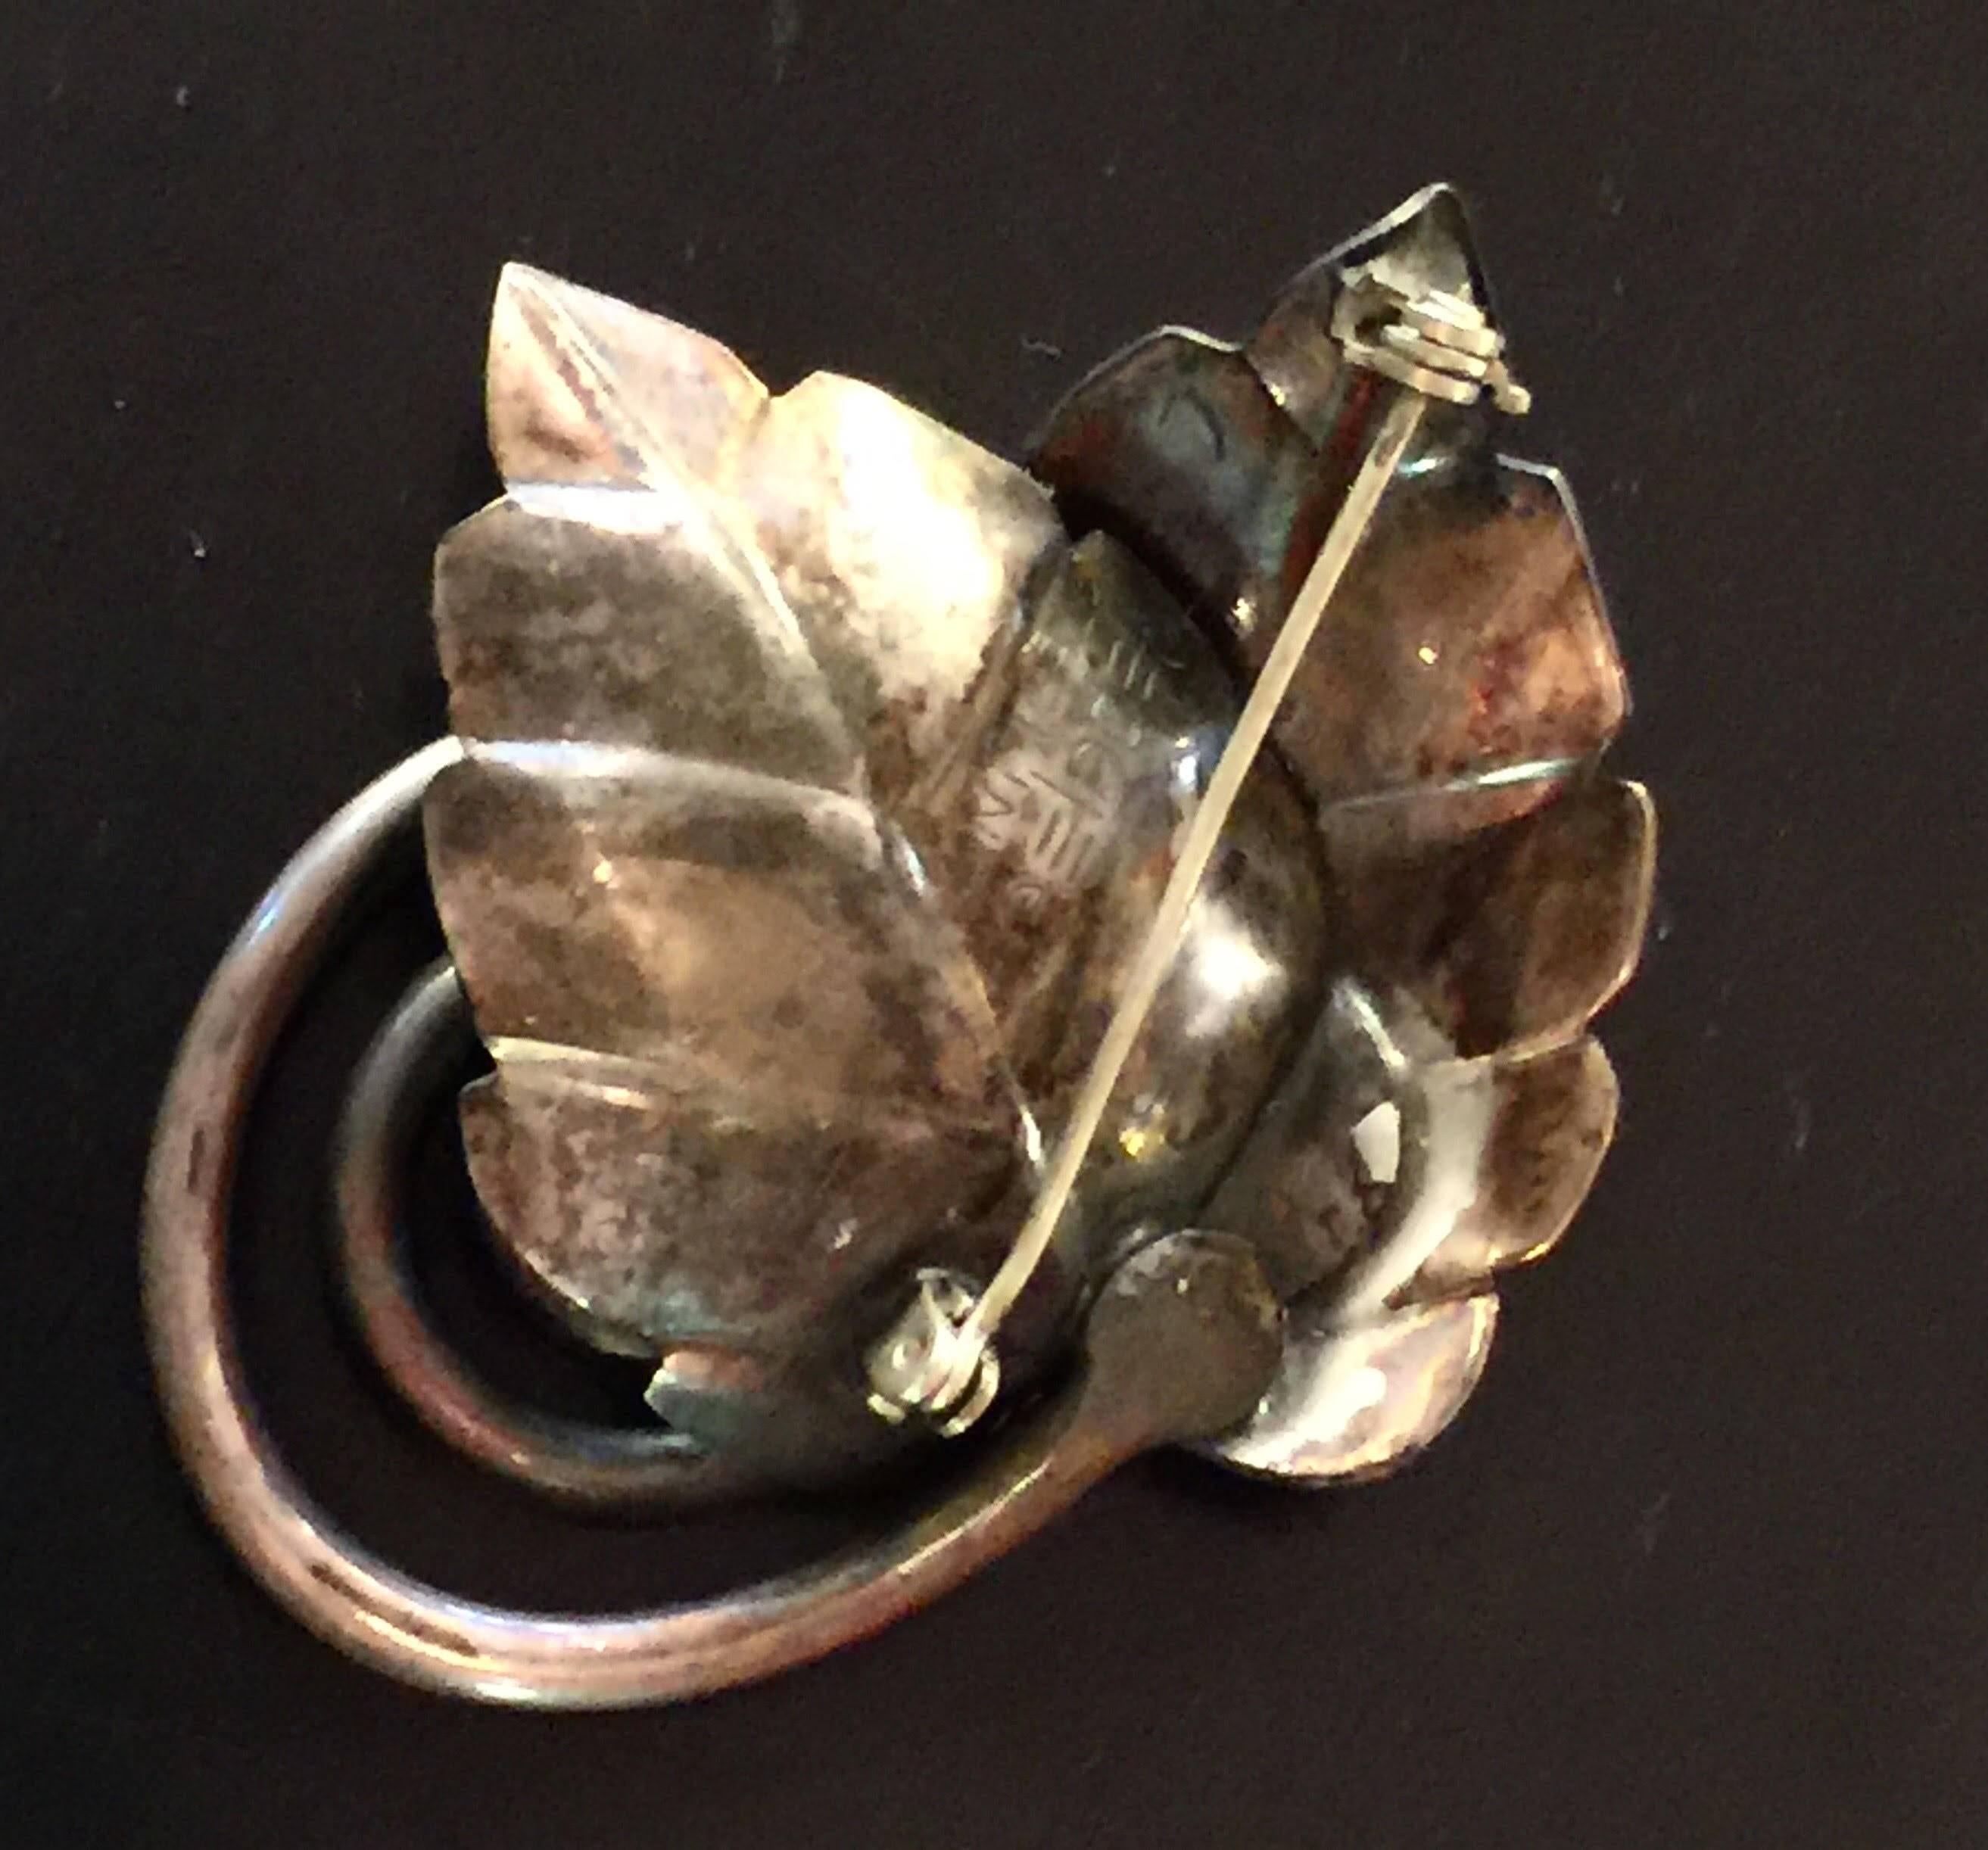 This highly naturalistic coiled stem leaf brooch in sterling silver is by noted Modernist artist Frank Rebajes, The artist worked in both copper and silver and mixed metals too, and this leaf pin has the dimensional and sculptural quality his work